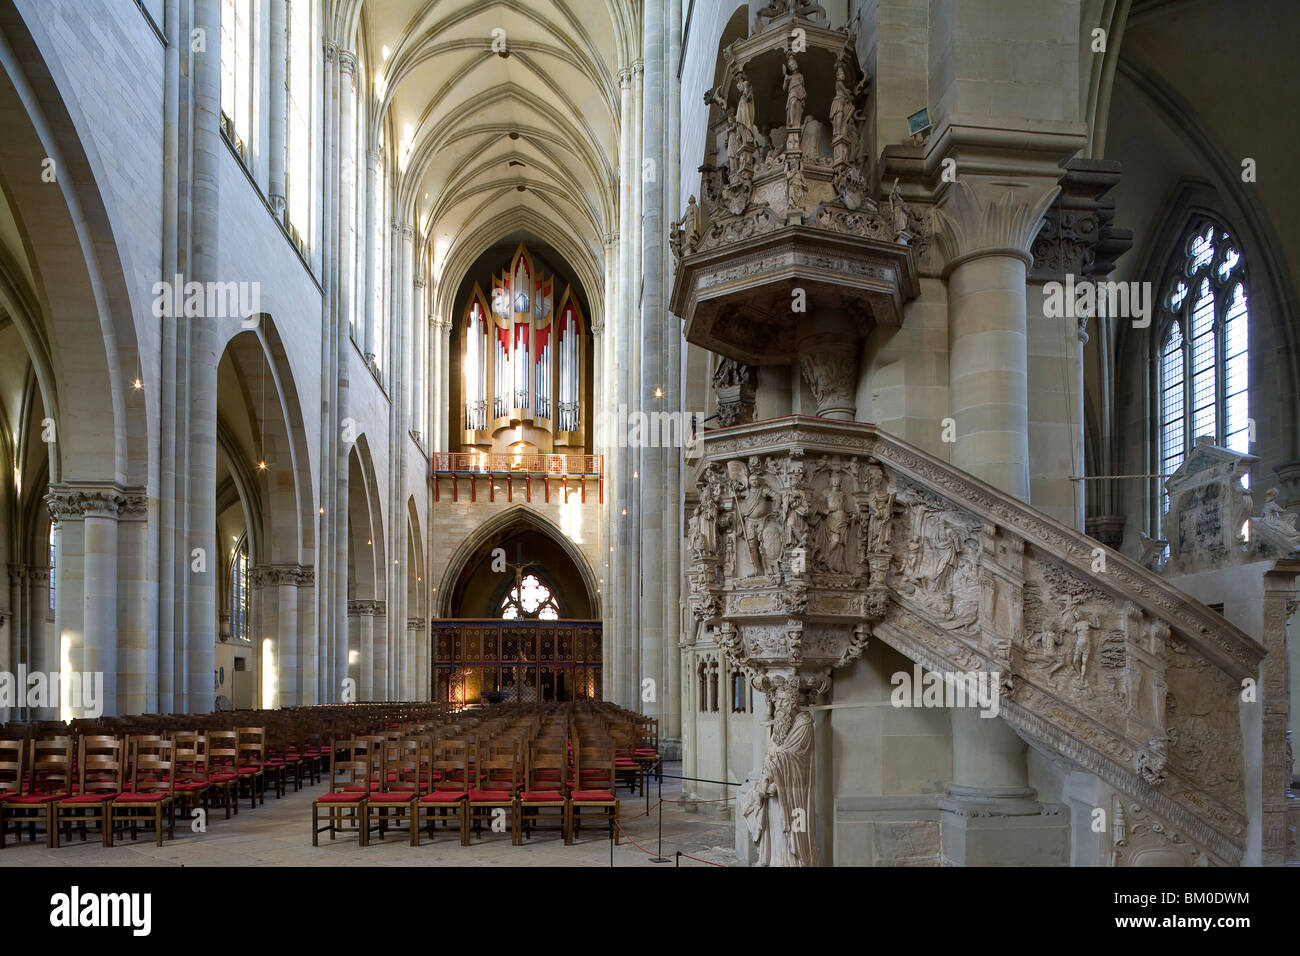 Chancel in Magdeburg Cathedral, on the river Elbe, Magdeburg, Saxony-Anhalt, Germany, Europe Stock Photo